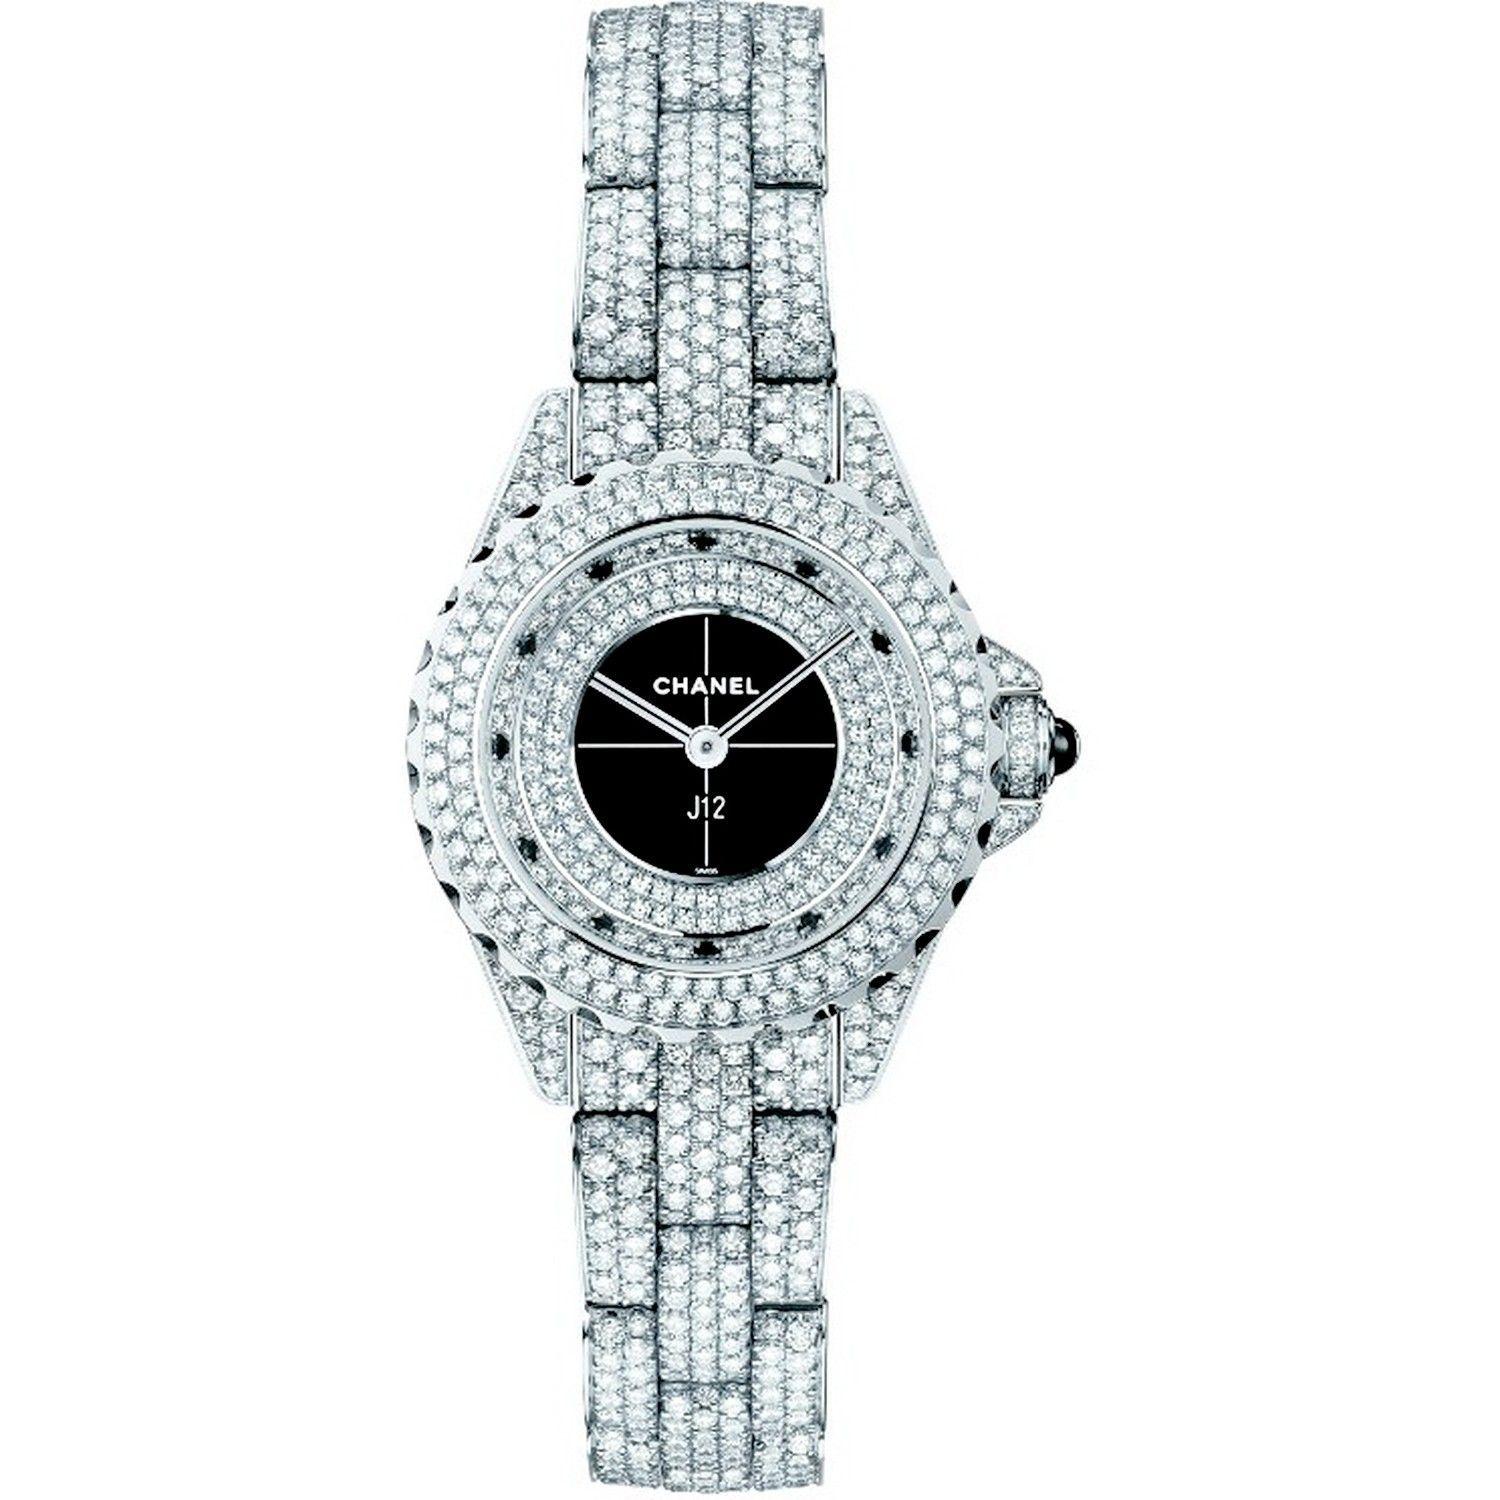 J12 Haute Joaillerie in White Gold with Diamond Bezel on White Gold Diamond Bracelet with Pave Diamond Dial